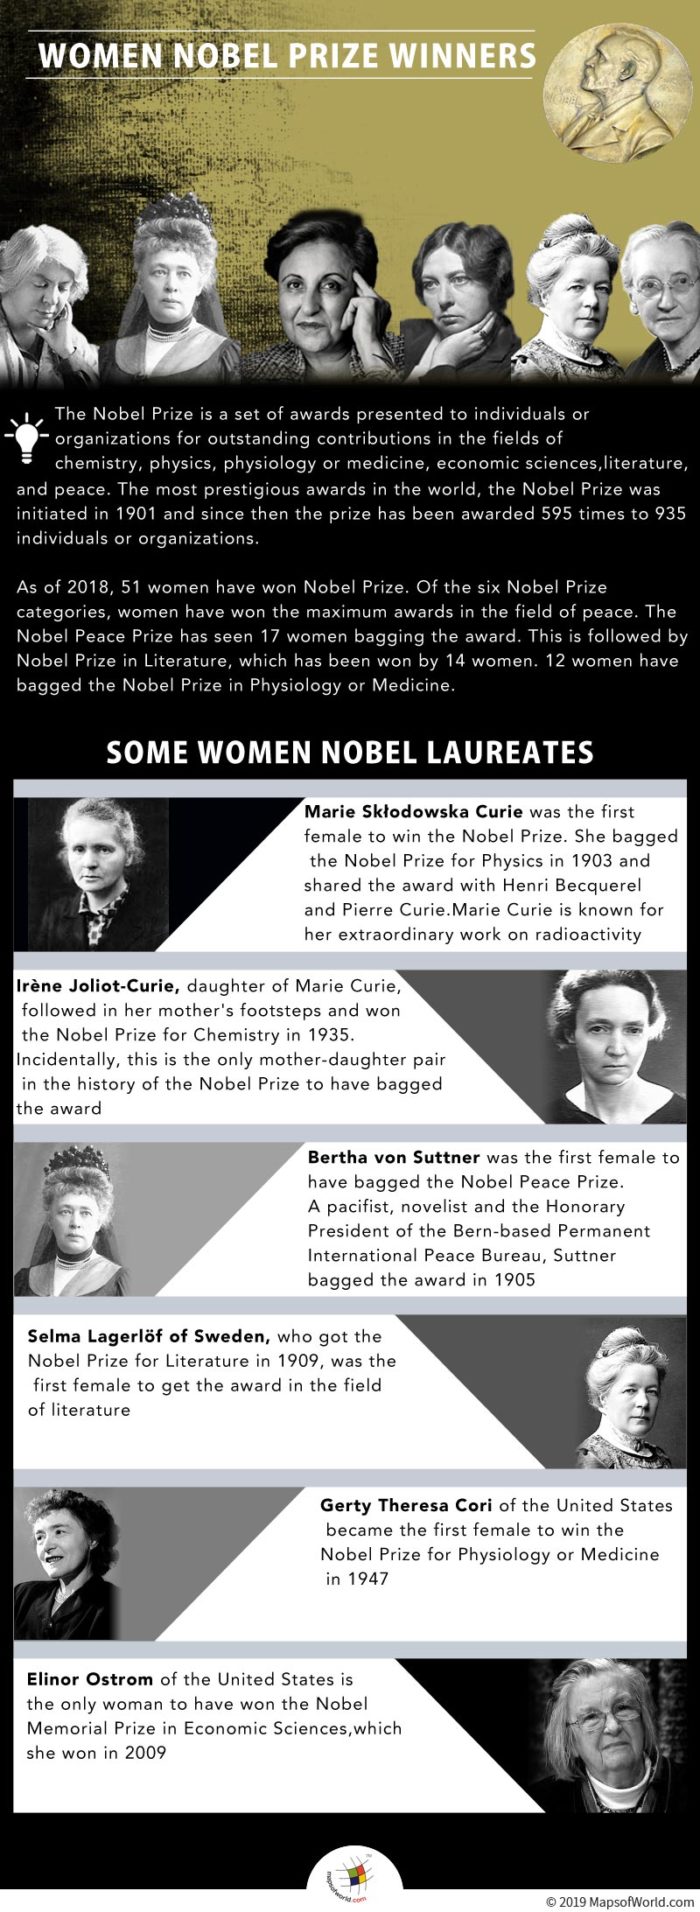 Infographic Giving Details on Women Nobel Prize Winners Answers